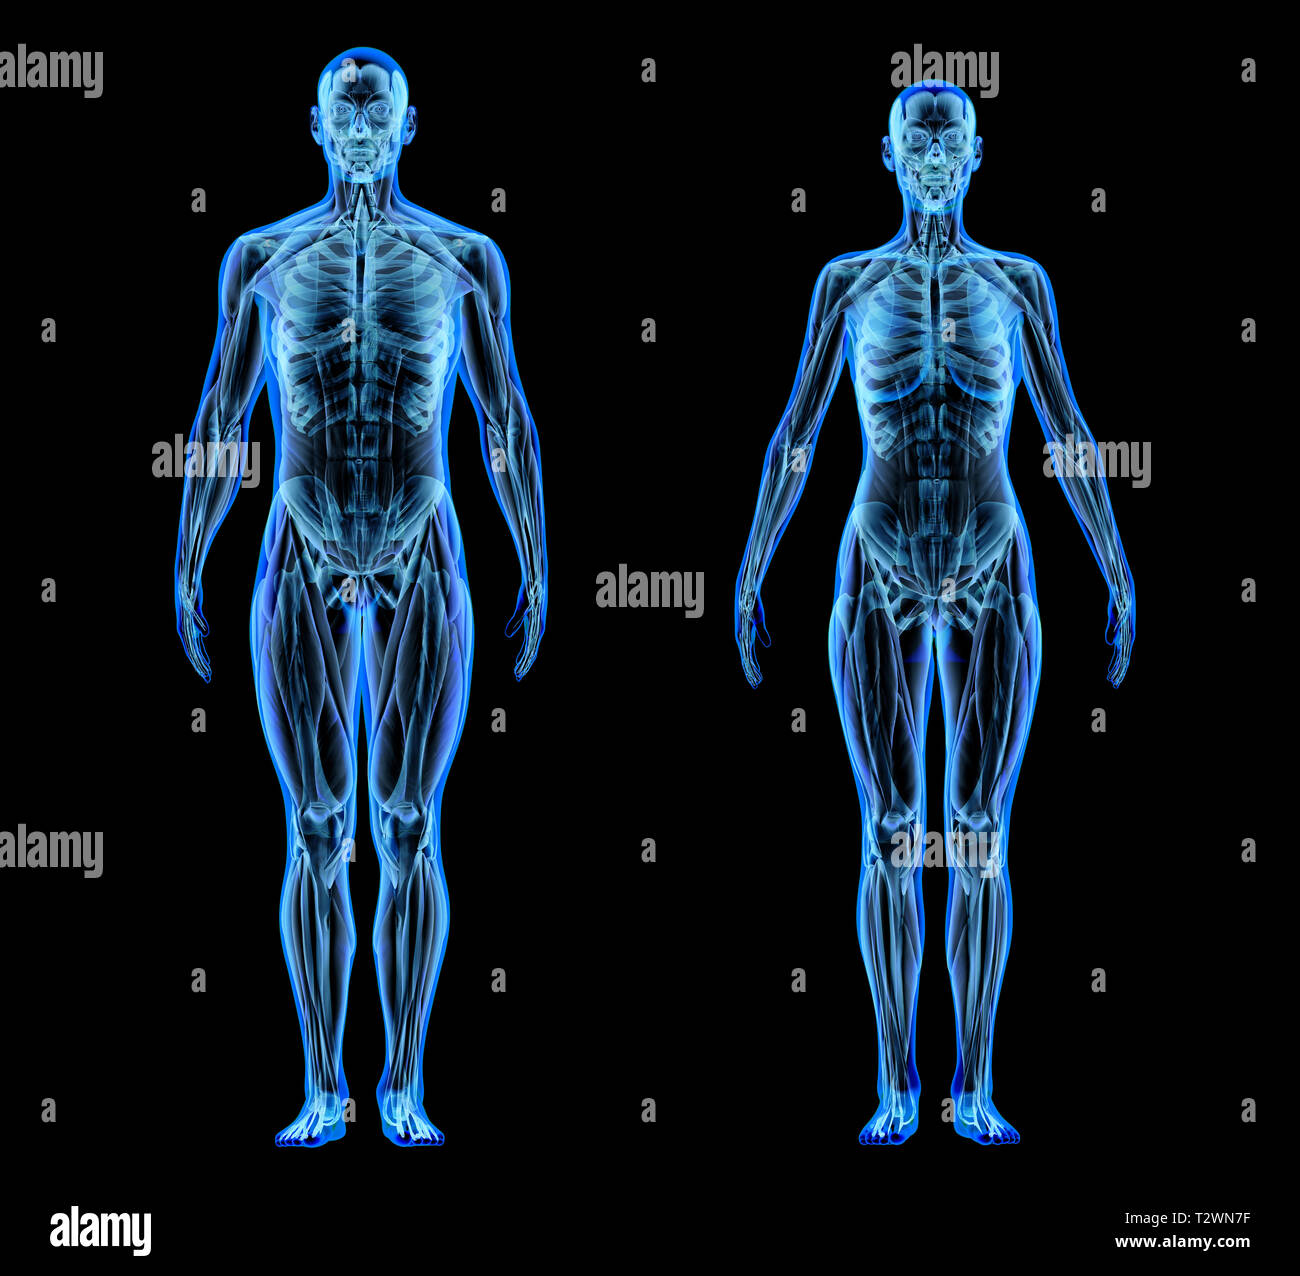 Man and woman muscle and skeletal systems. X-ray effect on black background. Stock Photo